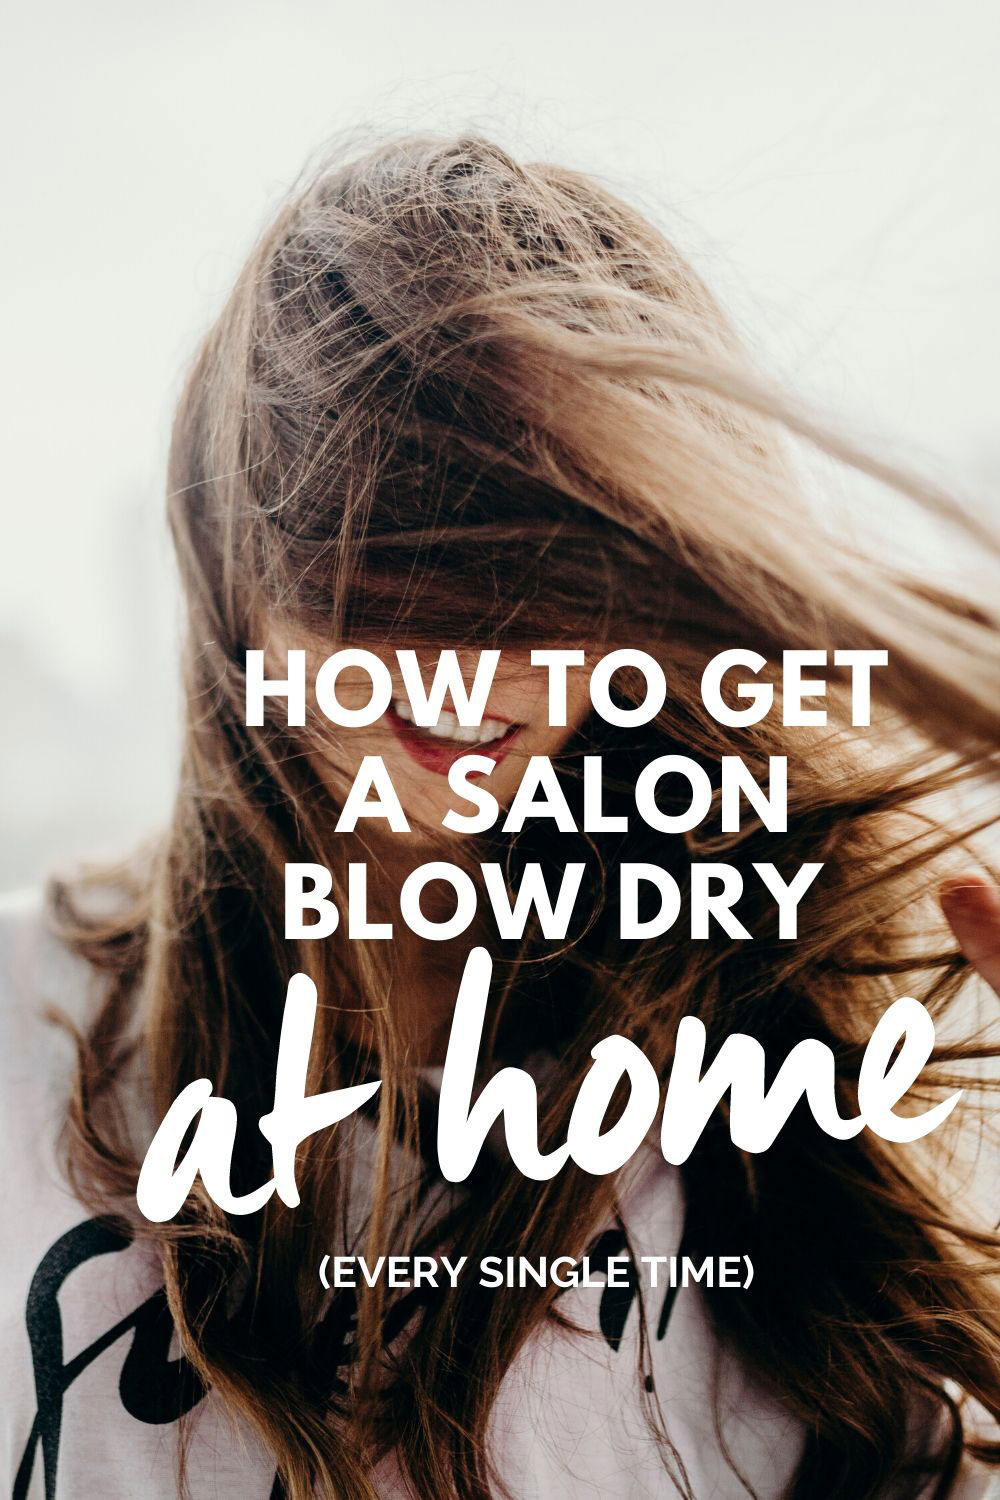 How to get a salon blow dry at home, every single time